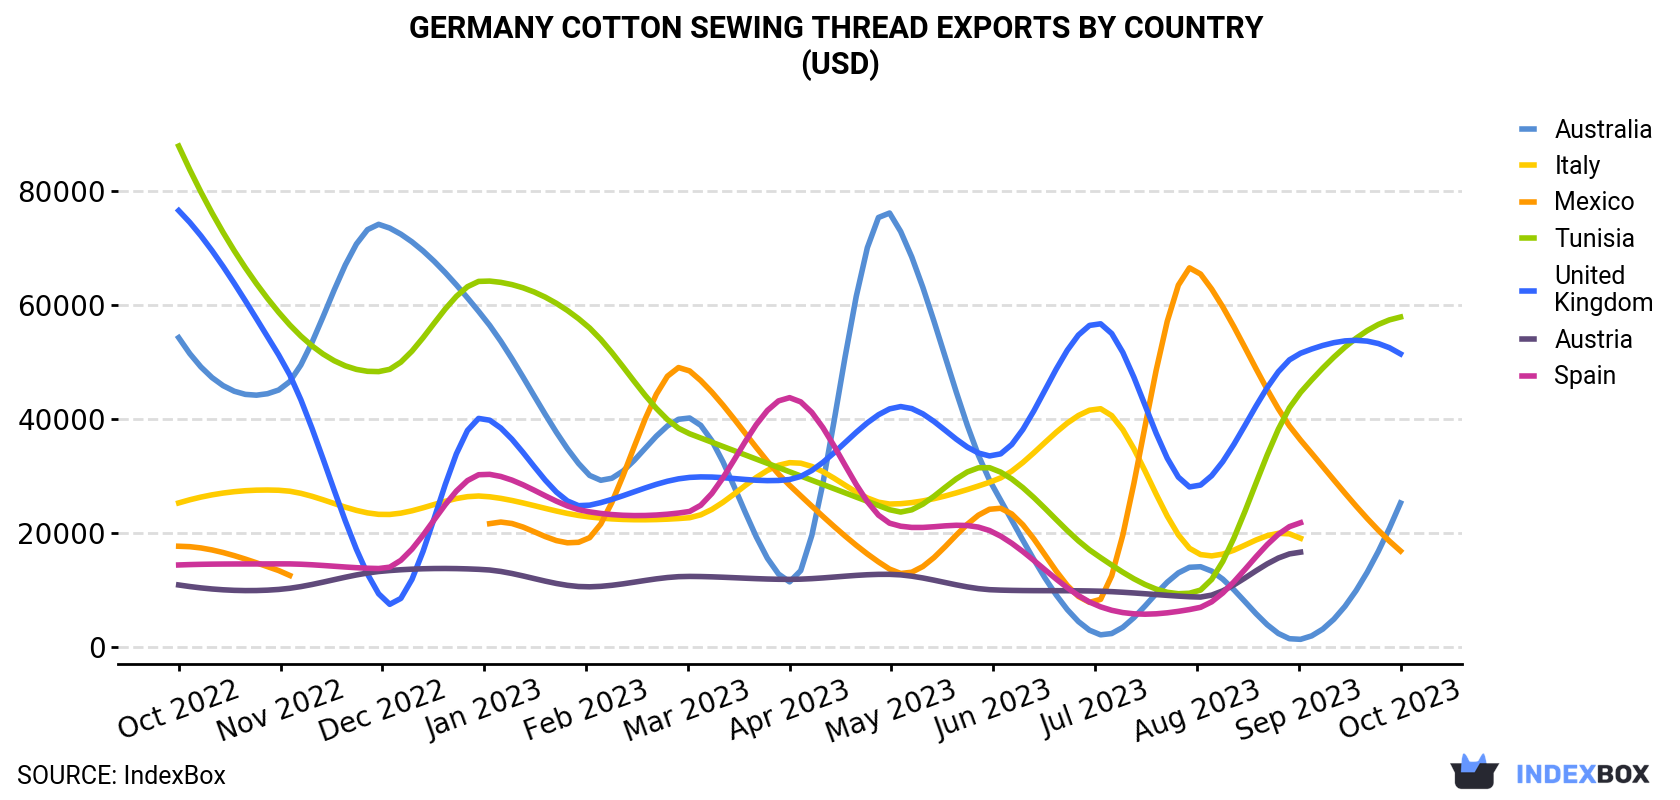 Germany Cotton Sewing Thread Exports By Country (USD)